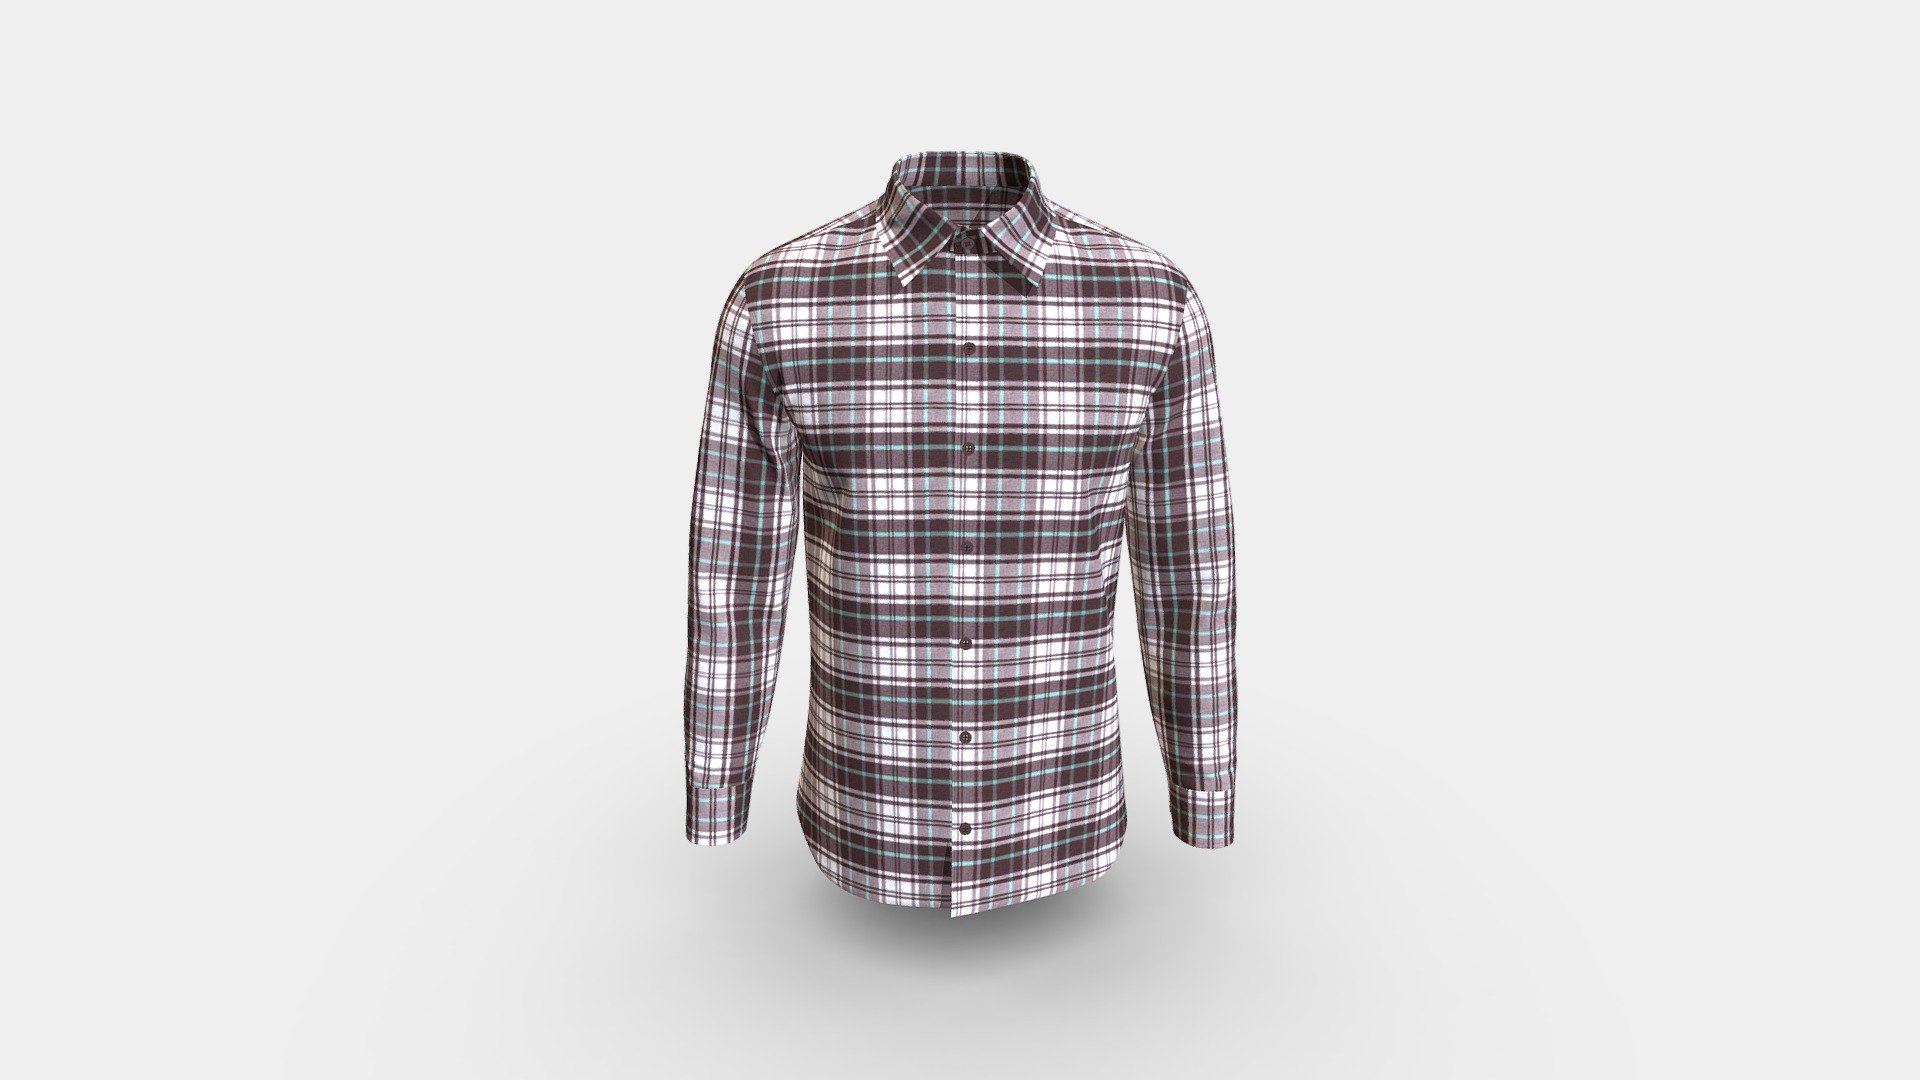 Cloth Title = Men Slim Fit Casual Shirt Design 

SKU = DG100072 

Category = Men 

Product Type = Shirt 

Cloth Length = Regular 

Body Fit = Slim Fit 

Occasion = Casual  

Sleeve Style = Long Sleeve 


Our Services: 

3D Apparel Design. 

OBJ,FBX,GLTF Making with High/Low Poly. 

Fabric Digitalization. 

Mockup making. 

3D Teck Pack. 

Pattern Making. 

2D Illustration. 

Cloth Animation and 360 Spin Video. 


Contact us:- 

Email: info@digitalfashionwear.com 

Website: https://digitalfashionwear.com 


We designed all the types of cloth specially focused on product visualization, e-commerce, fitting, and production. 

We will design: 

T-shirts 

Polo shirts 

Hoodies 

Sweatshirt 

Jackets 

Shirts 

TankTops 

Trousers 

Bras 

Underwear 

Blazer 

Aprons 

Leggings 

and All Fashion items. 





Our goal is to make sure what we provide you, meets your demand 3d model